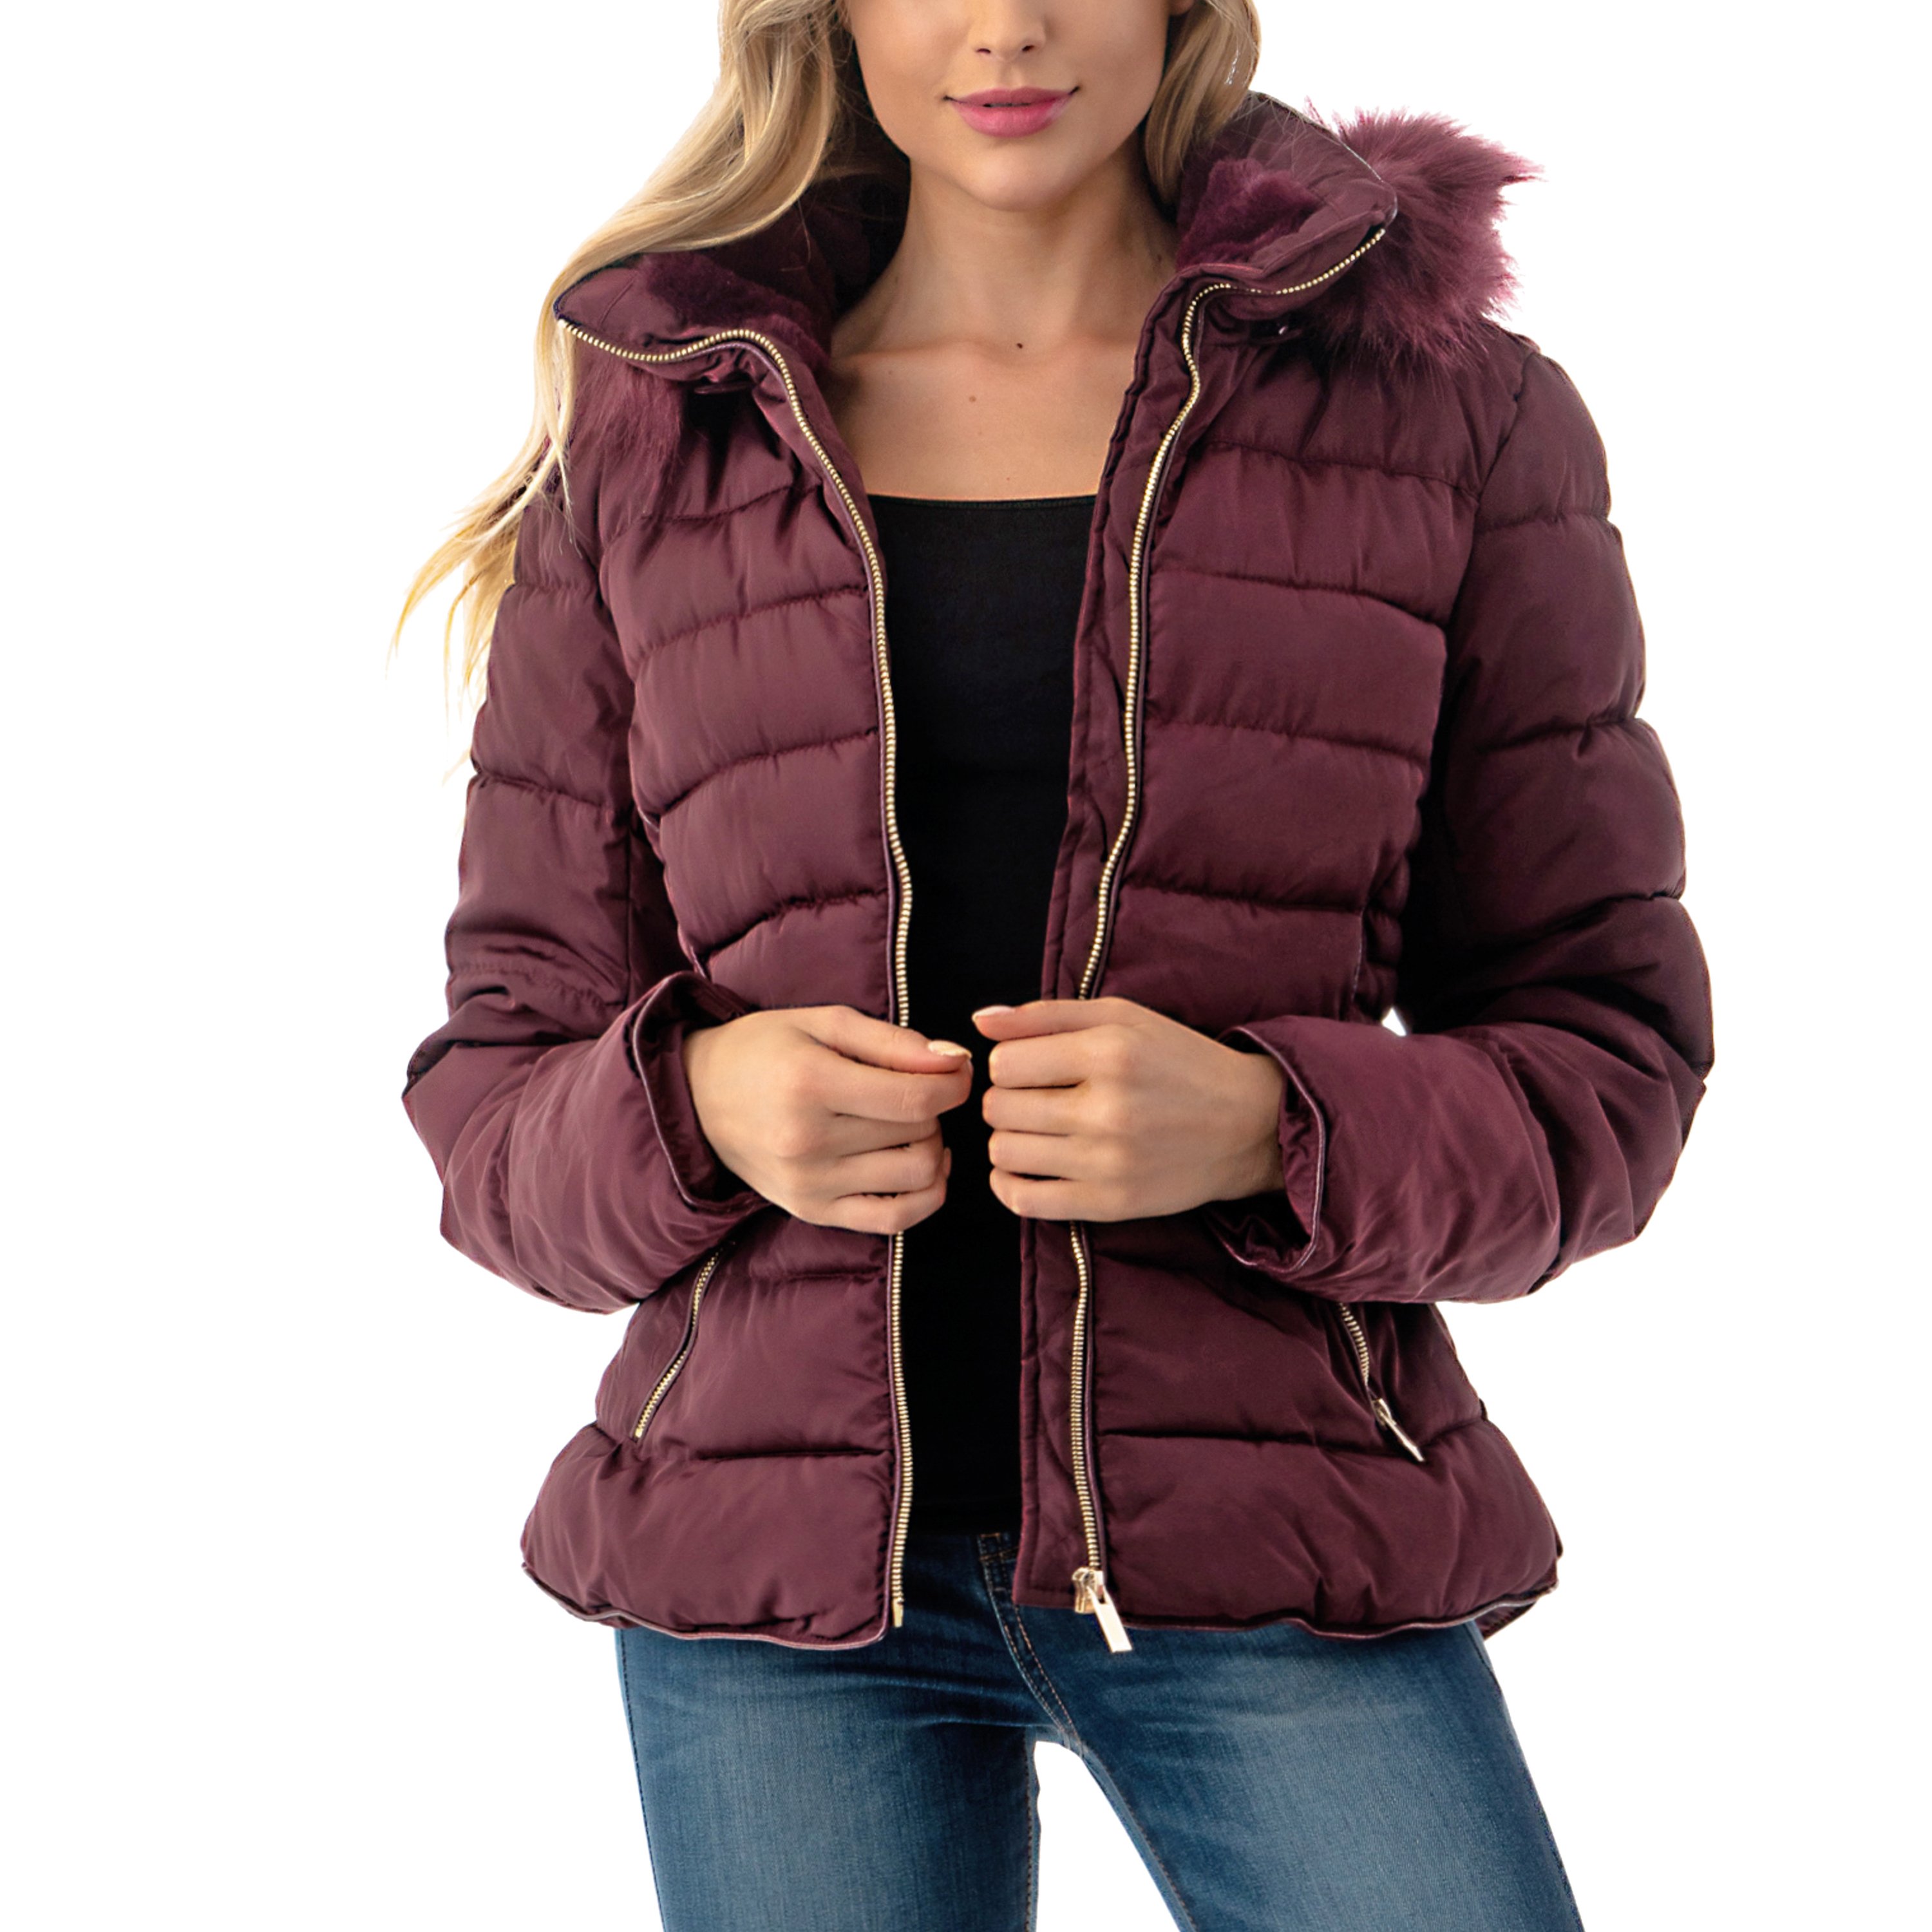 Fashionazzle Women's Short Puffer Coat with Removable Faux Fur Trim Hood Jacket - image 4 of 14